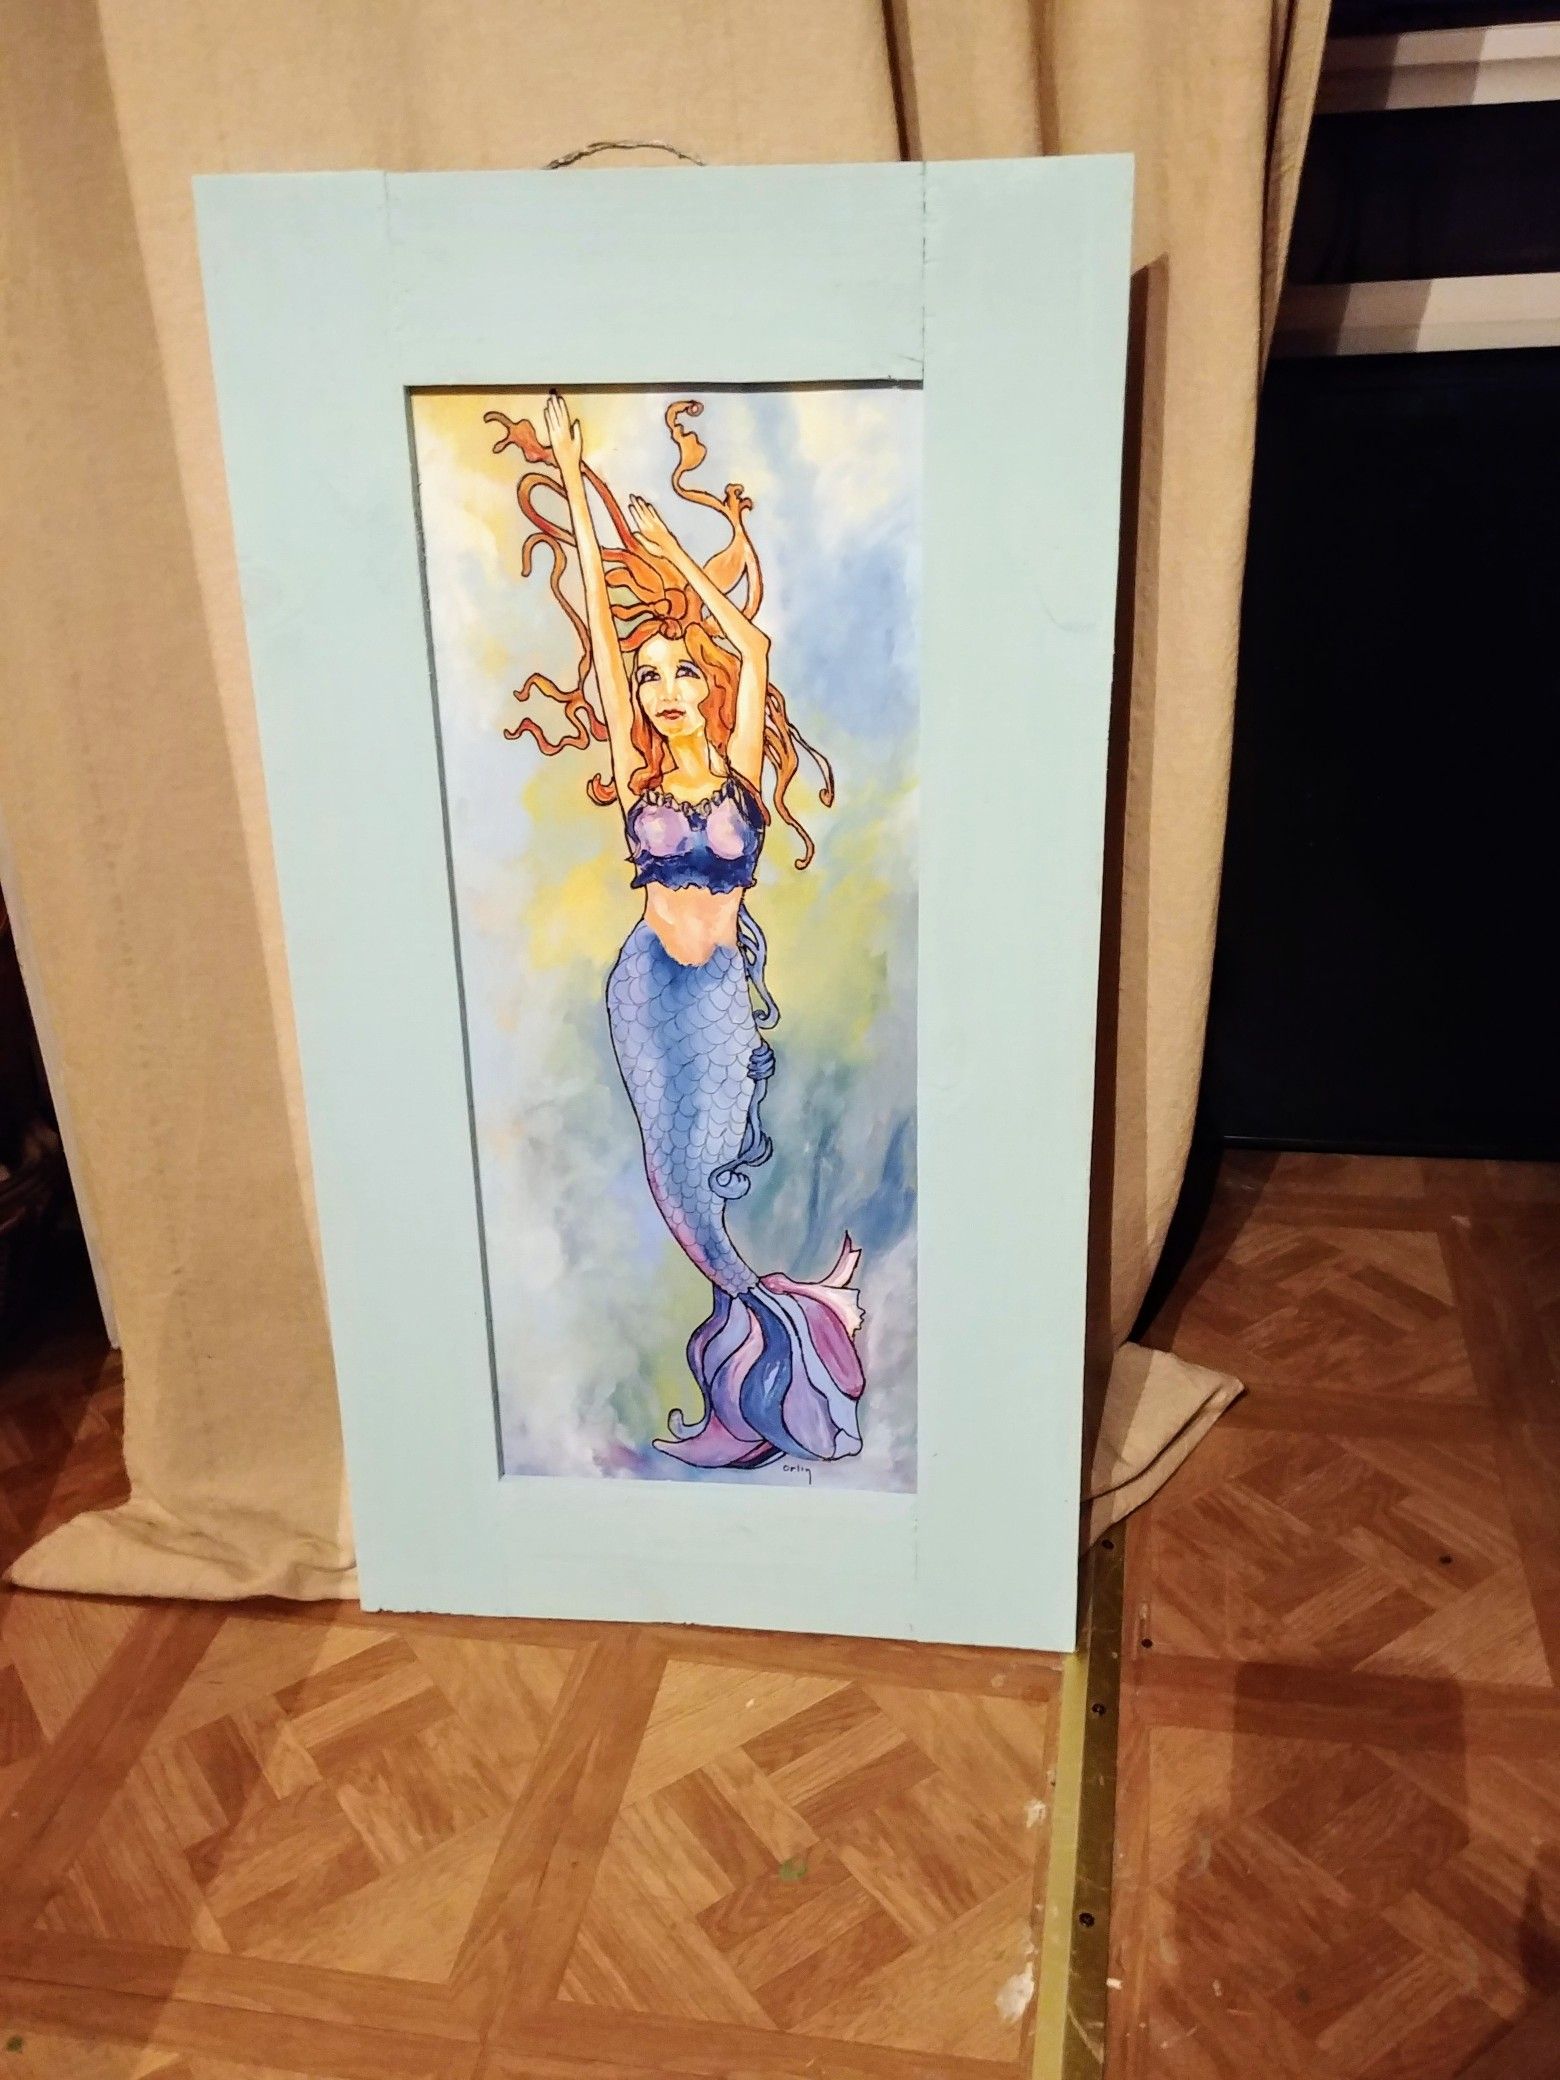 In St. Cloud - Mermaid painting on wood with wood frame